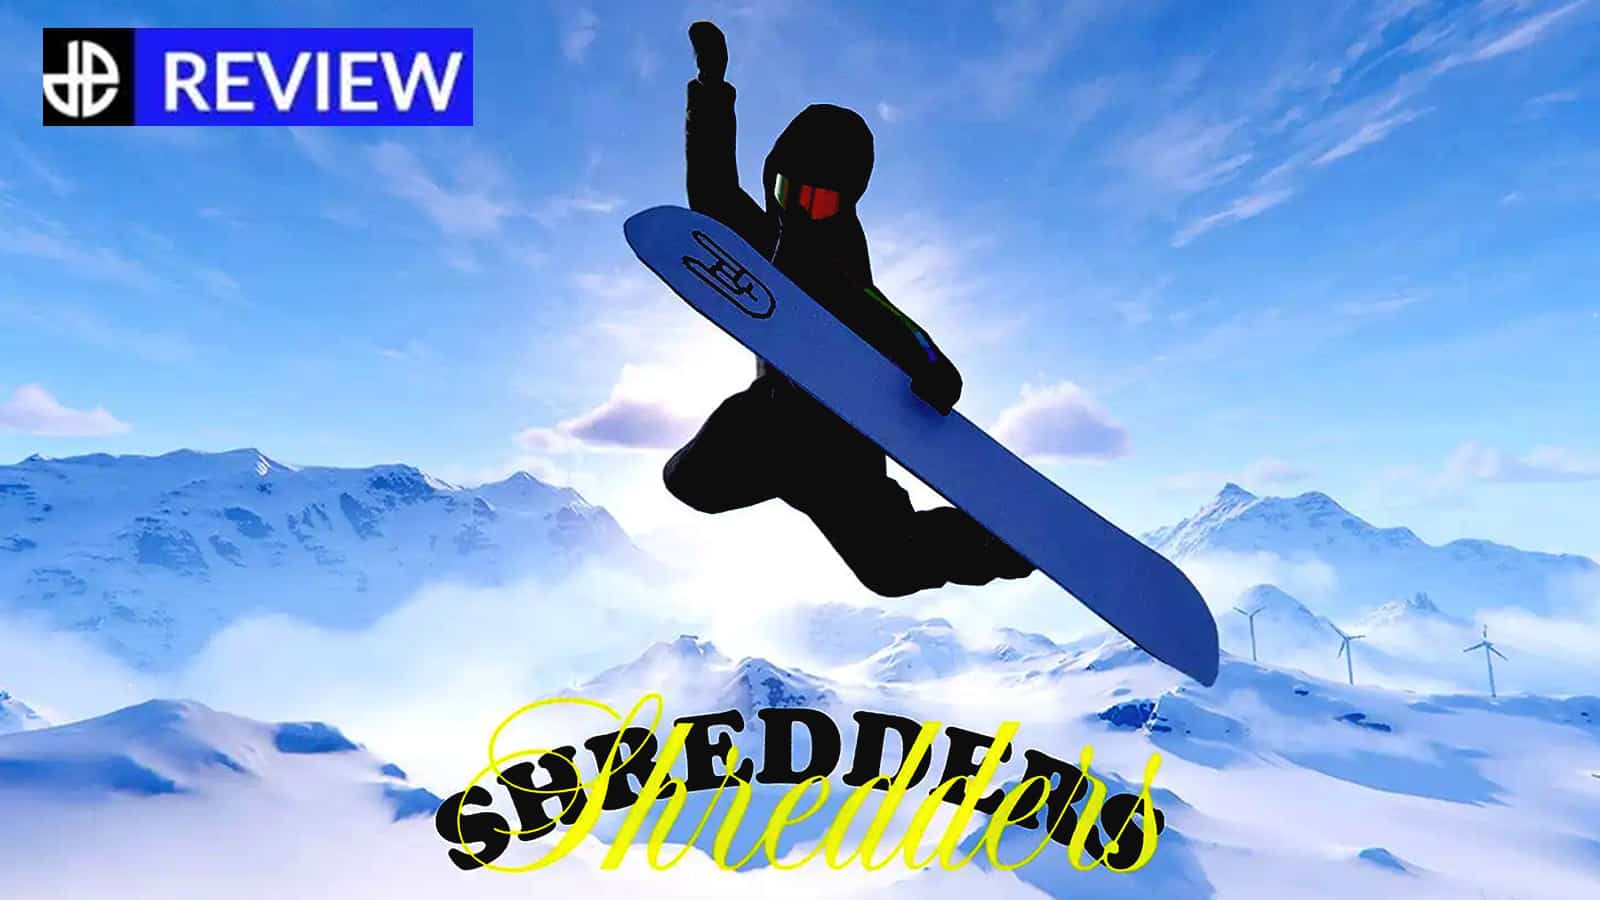 An image of the game Shredders on Xbox